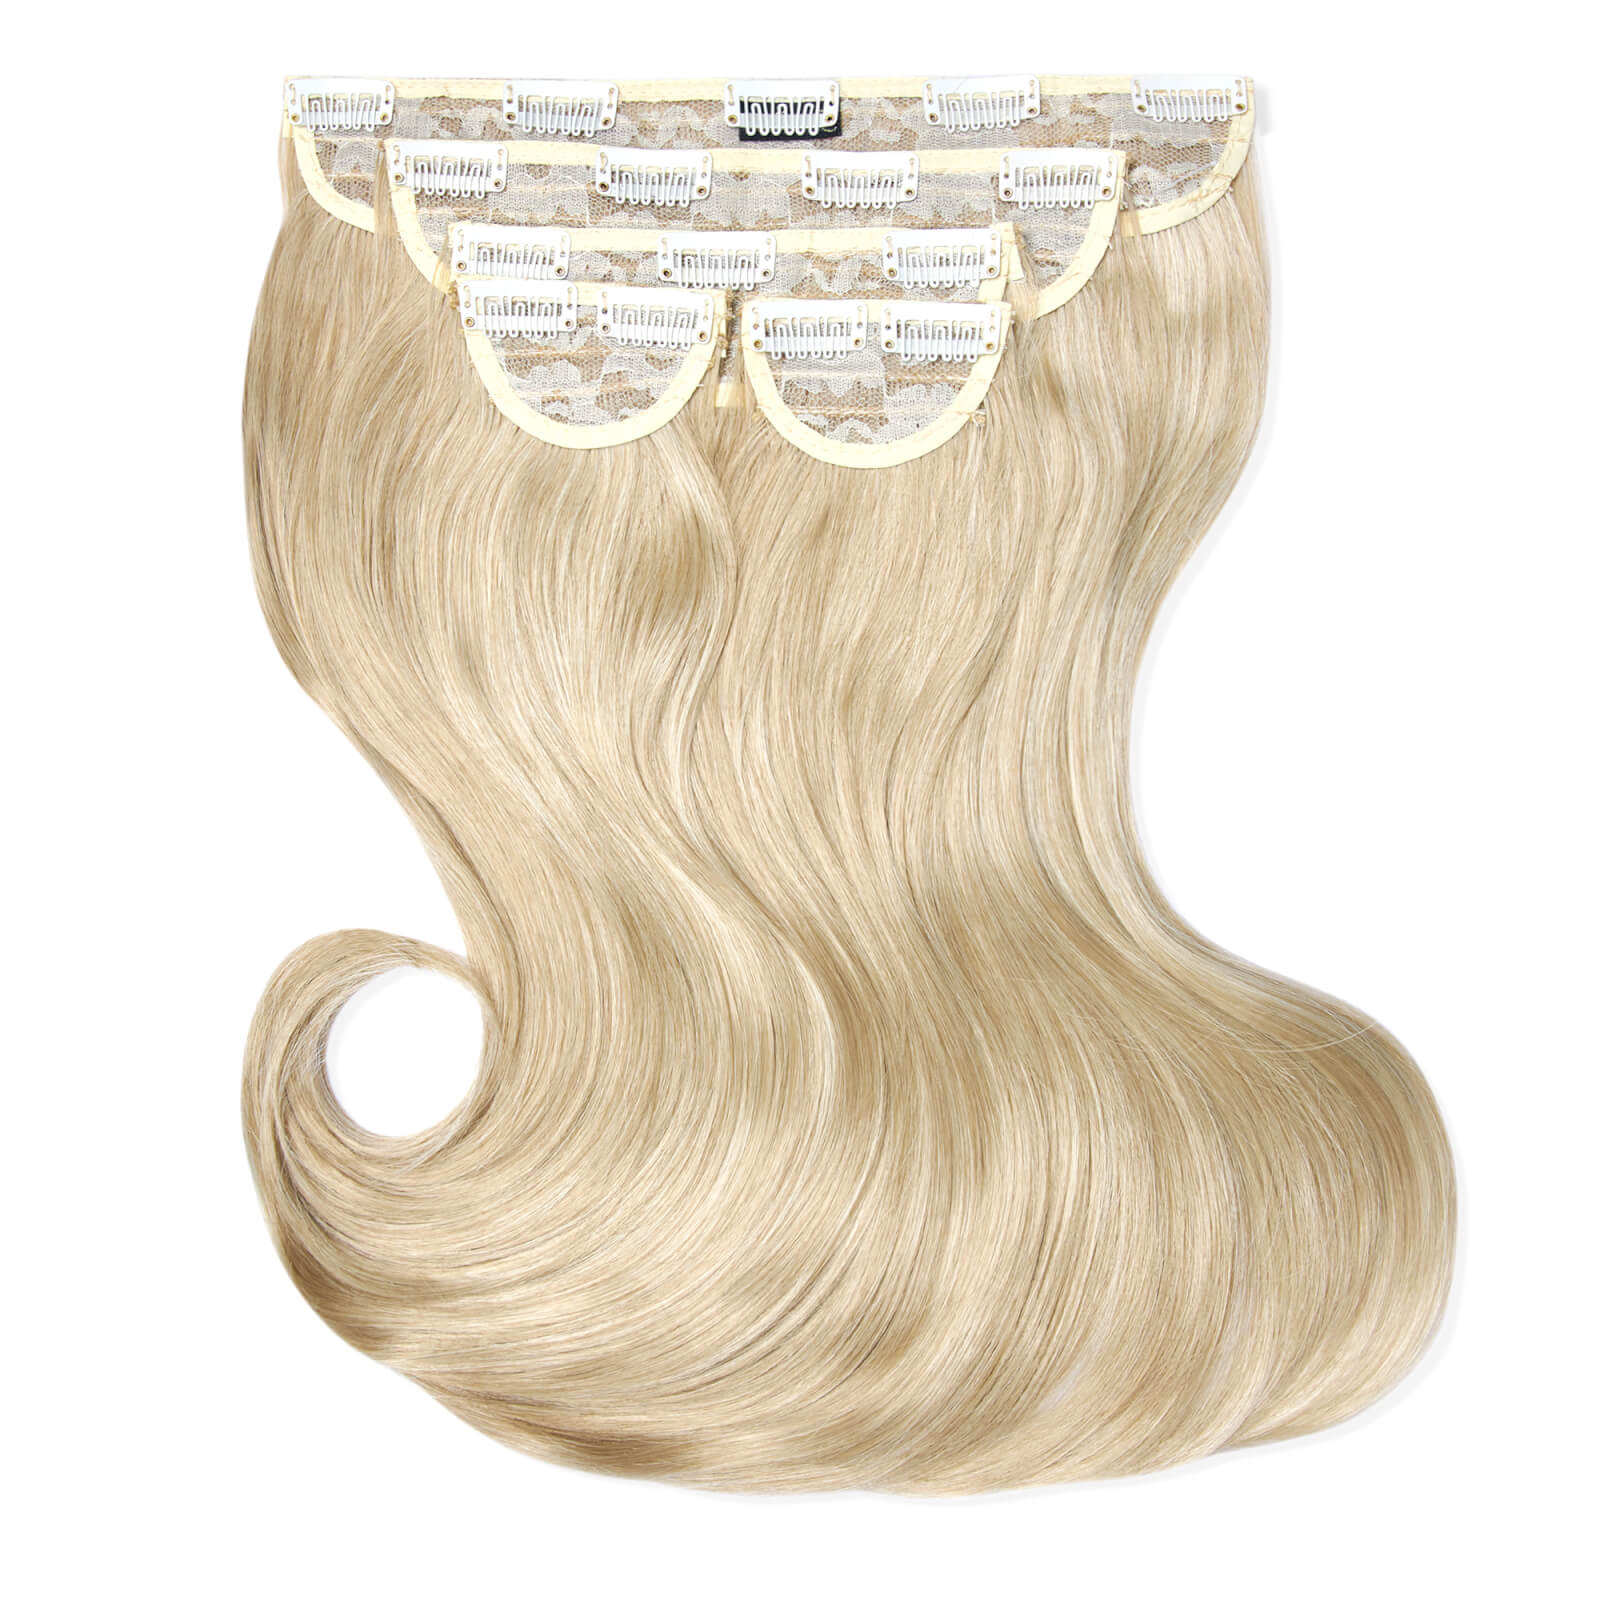 Image of LullaBellz Super Thick 16 5 Piece Blow Dry Wavy Clip In Extensions (Various Shades) - Light Blonde